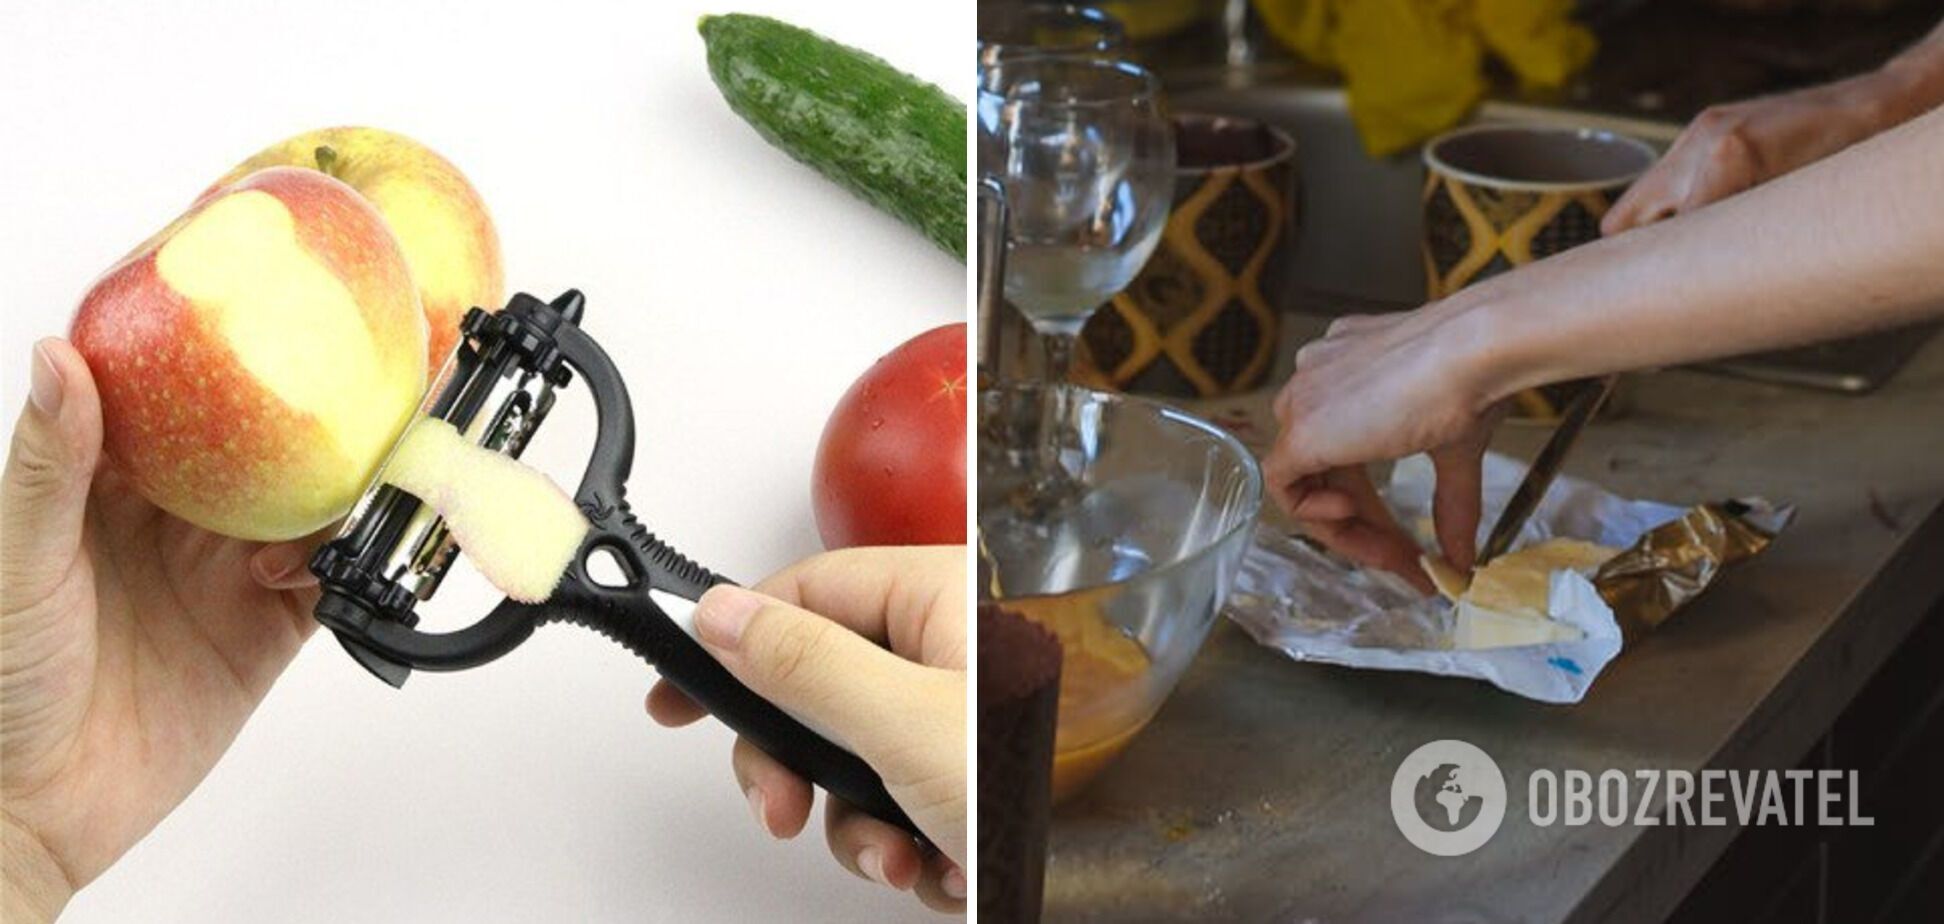 Vegetable peeler that can be used instead of a butter knife